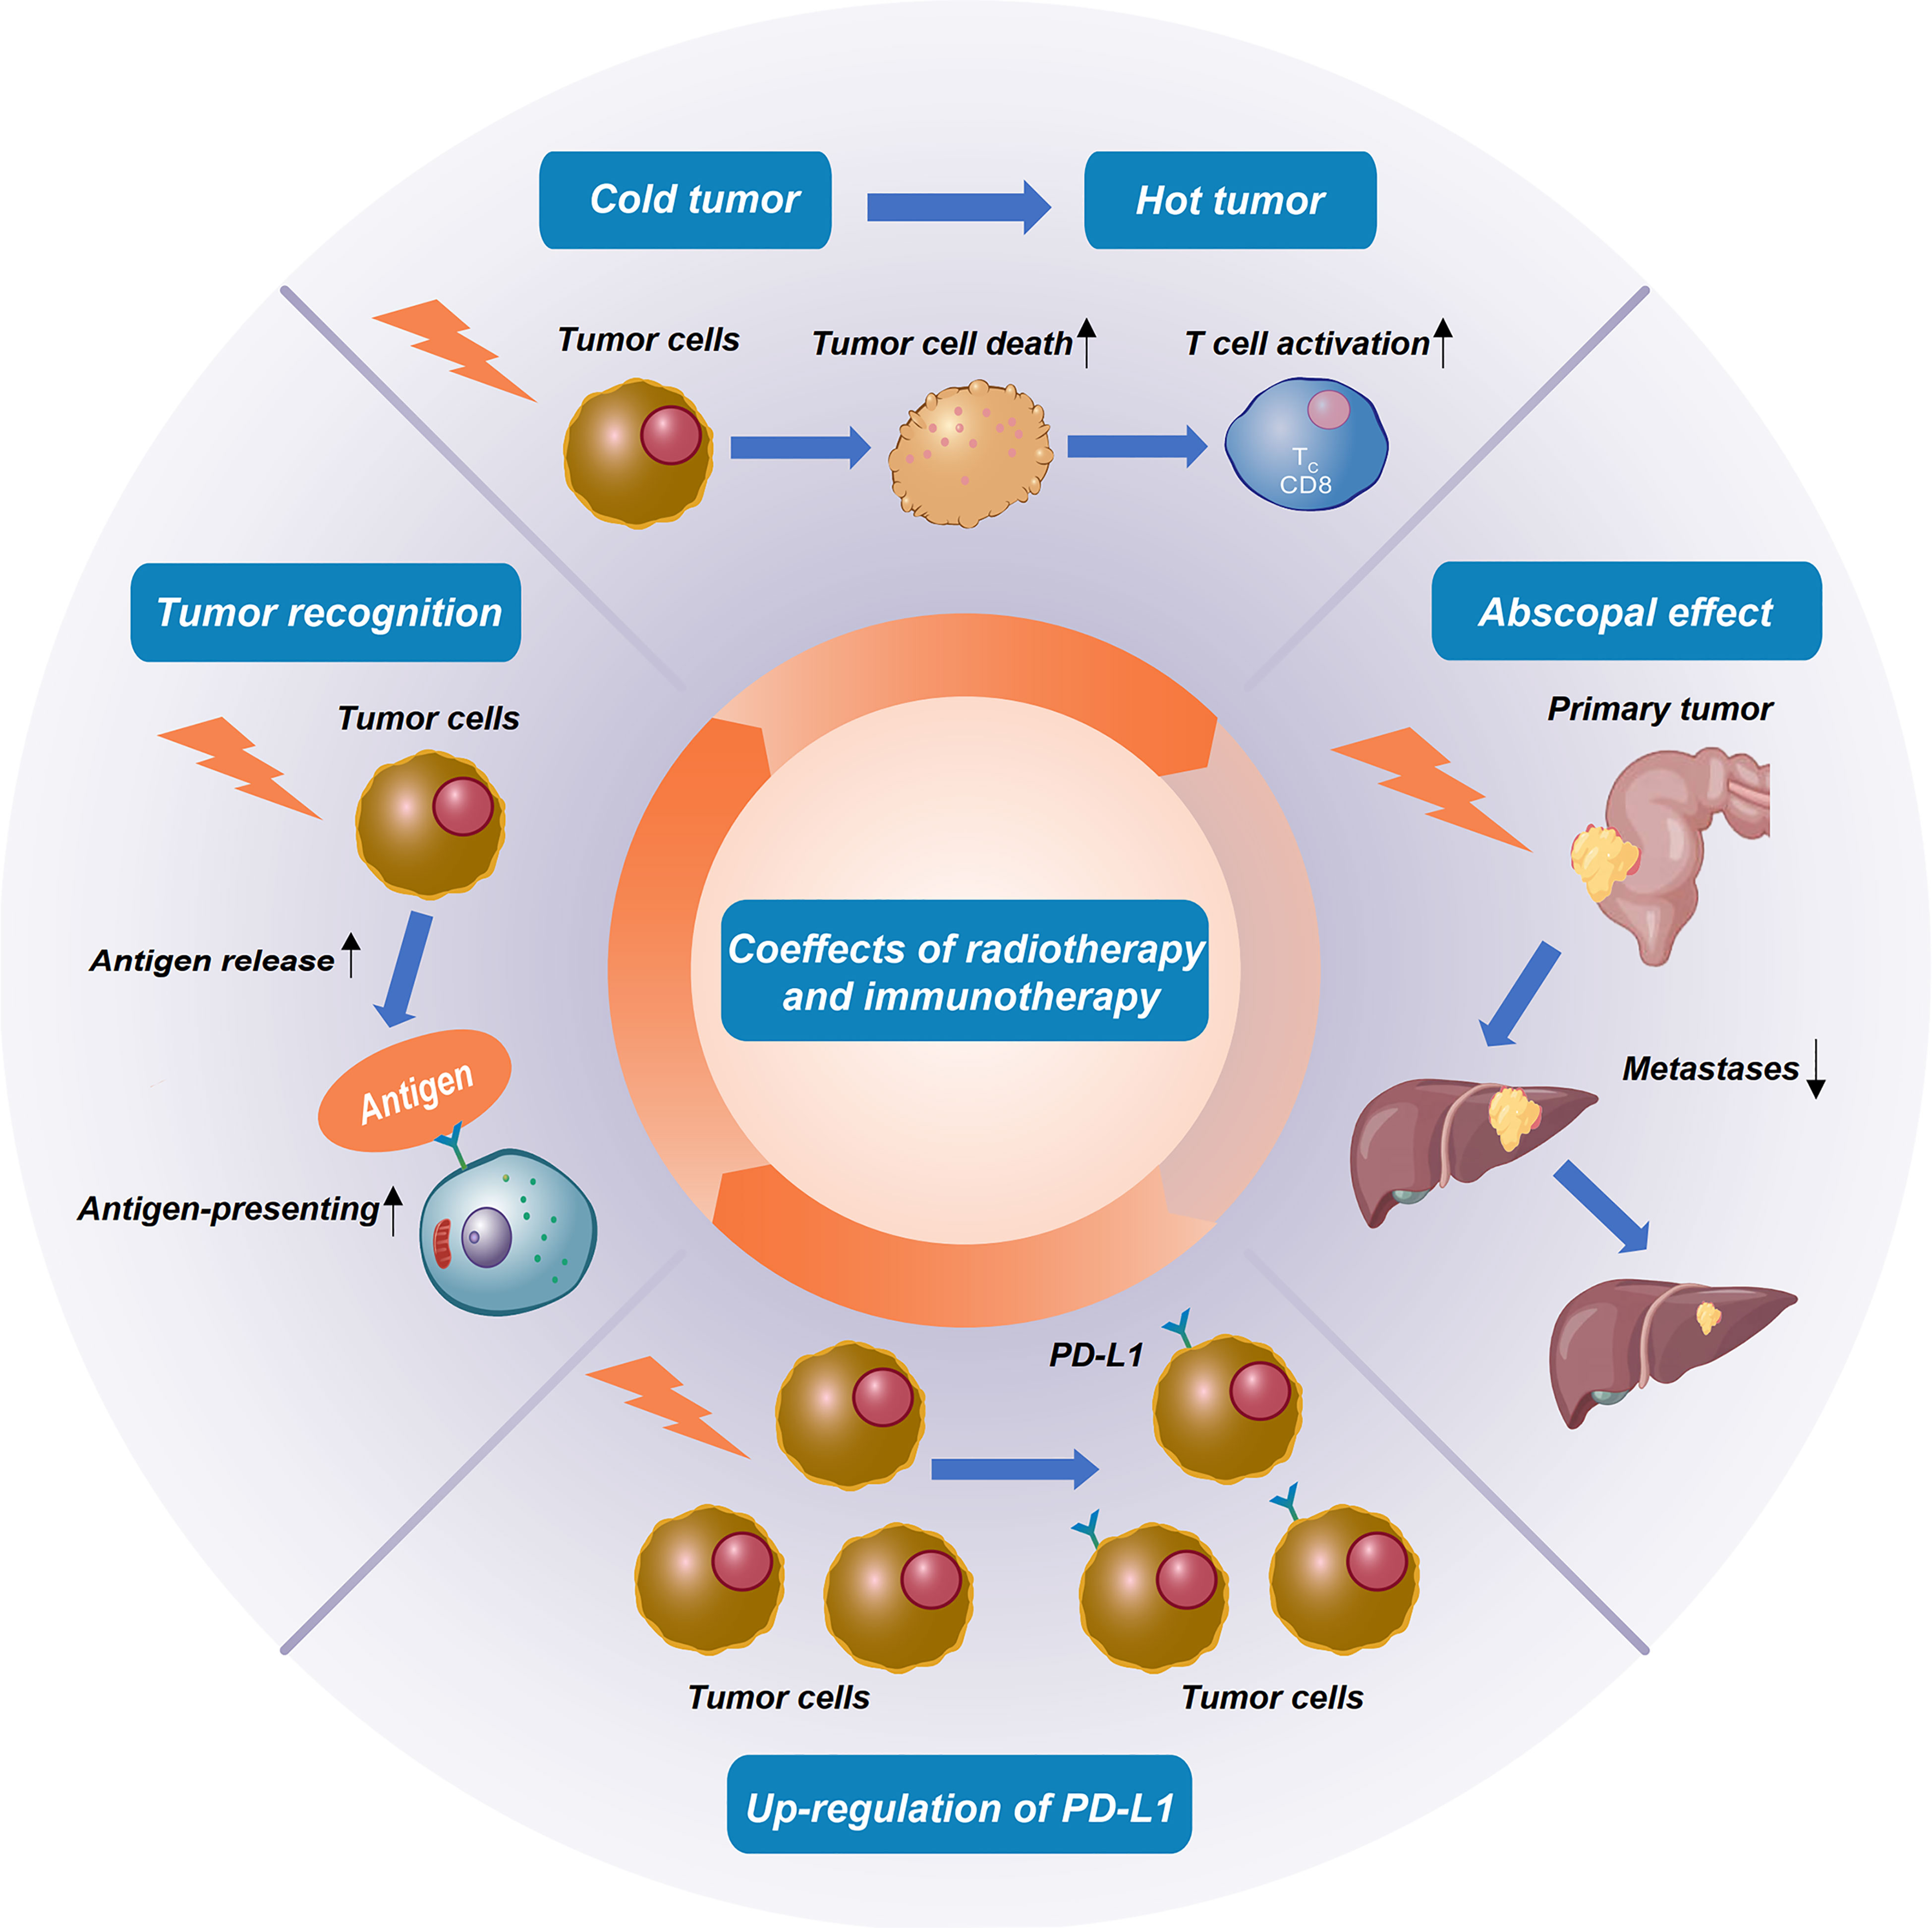 Frontiers | Radioimmunotherapy in colorectal cancer treatment